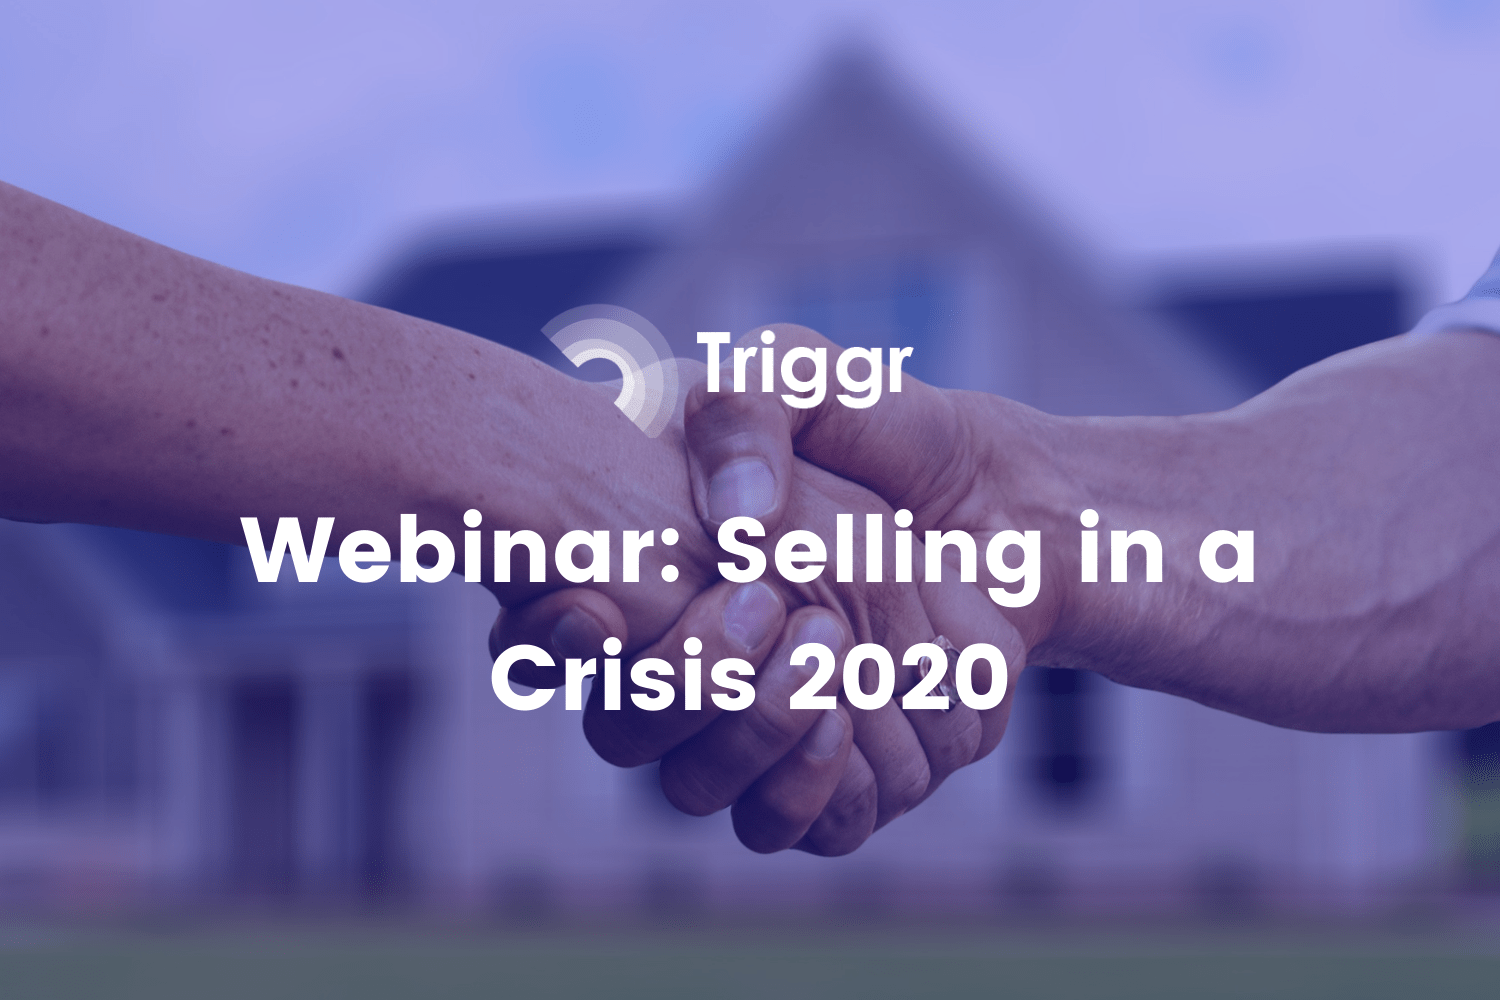 Selling during a crisis